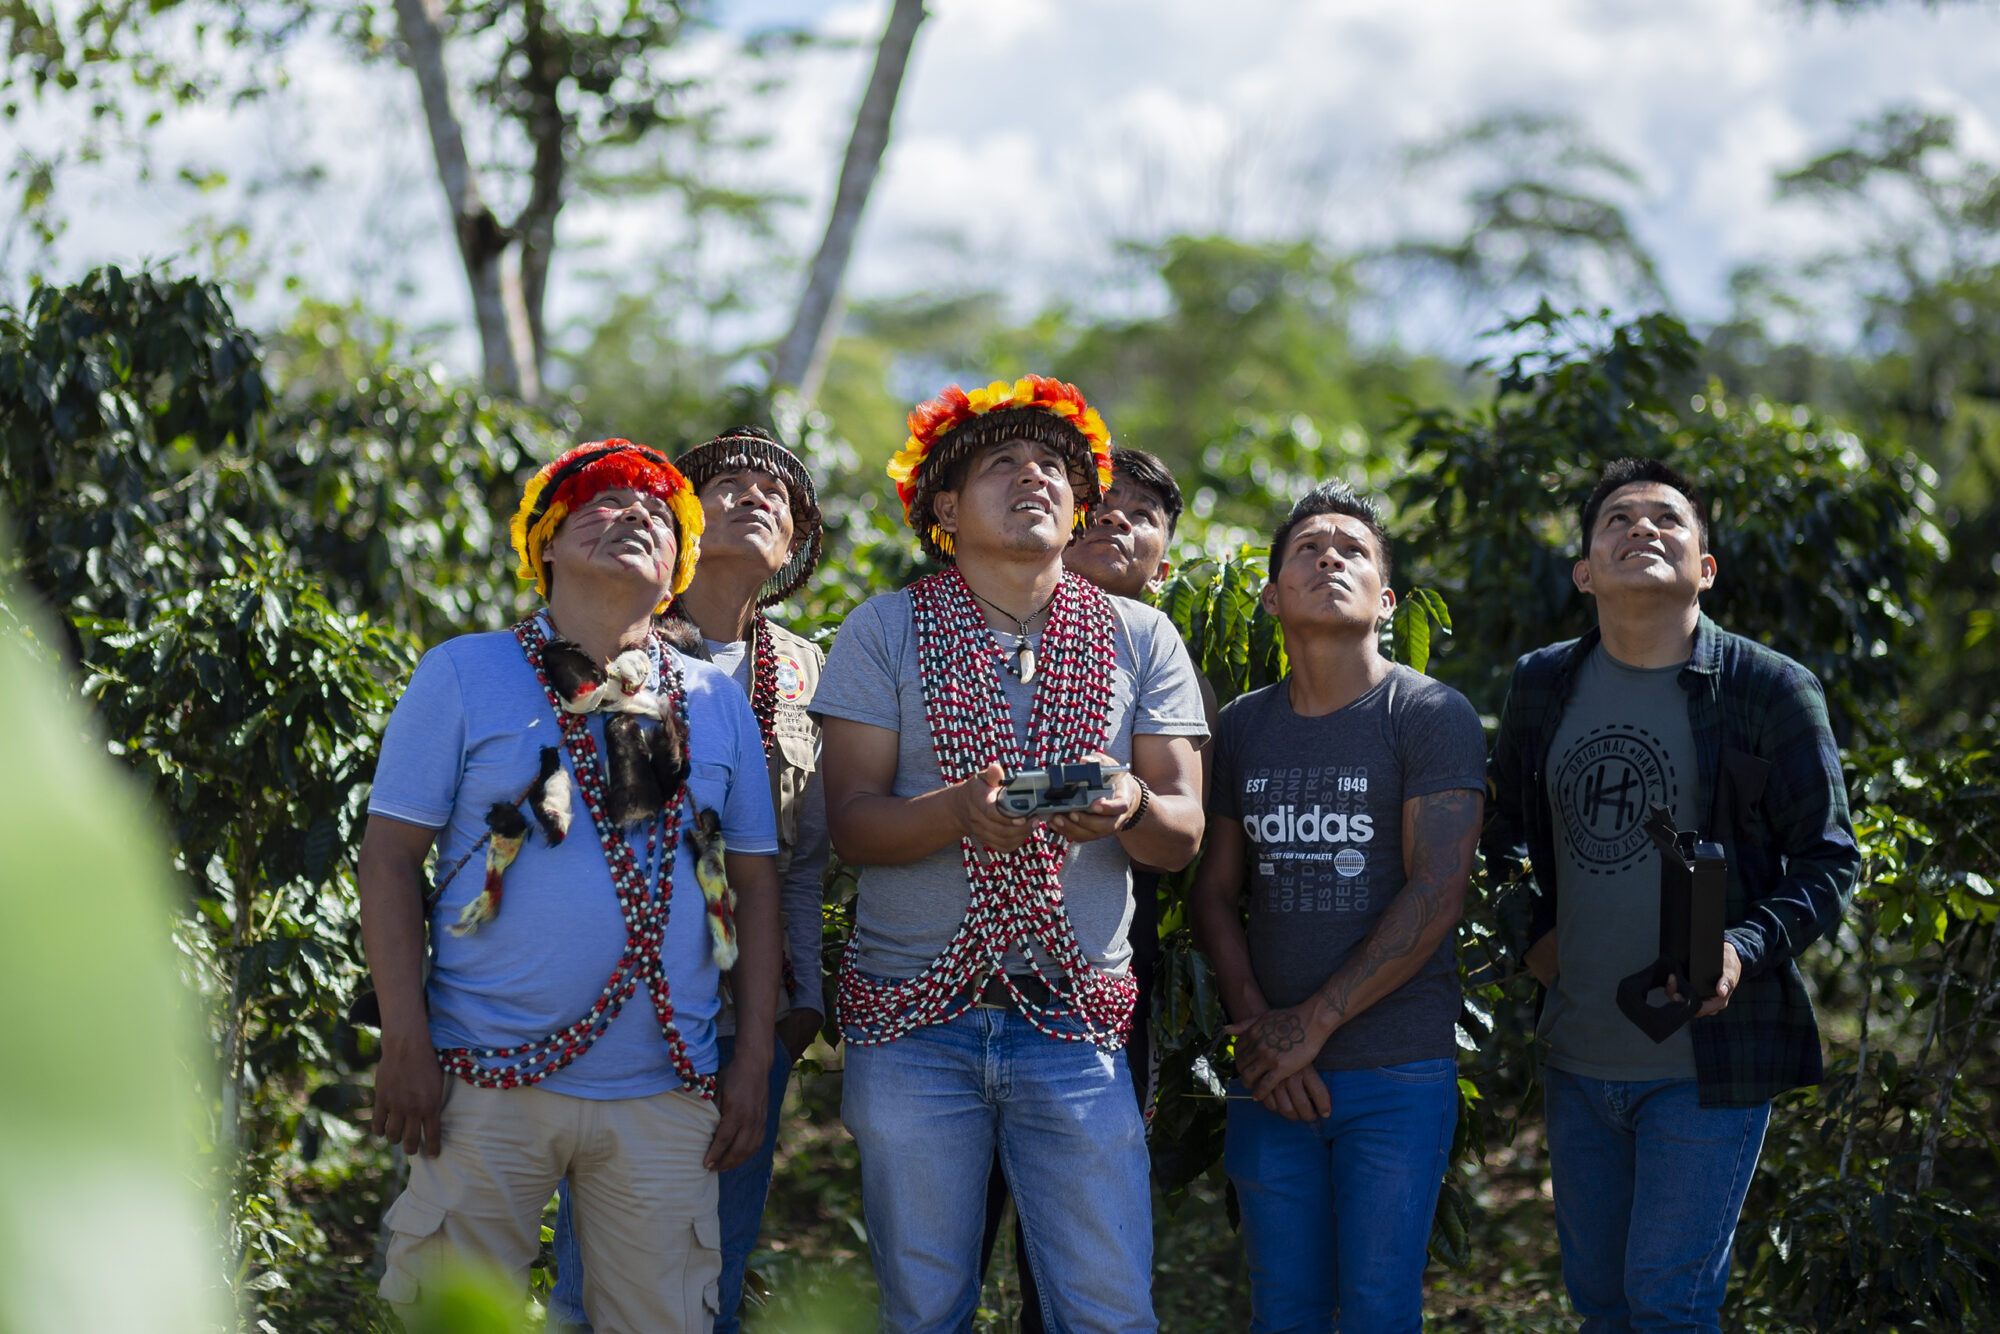 Communities in the Peruvian Amazon using drones to protect territory